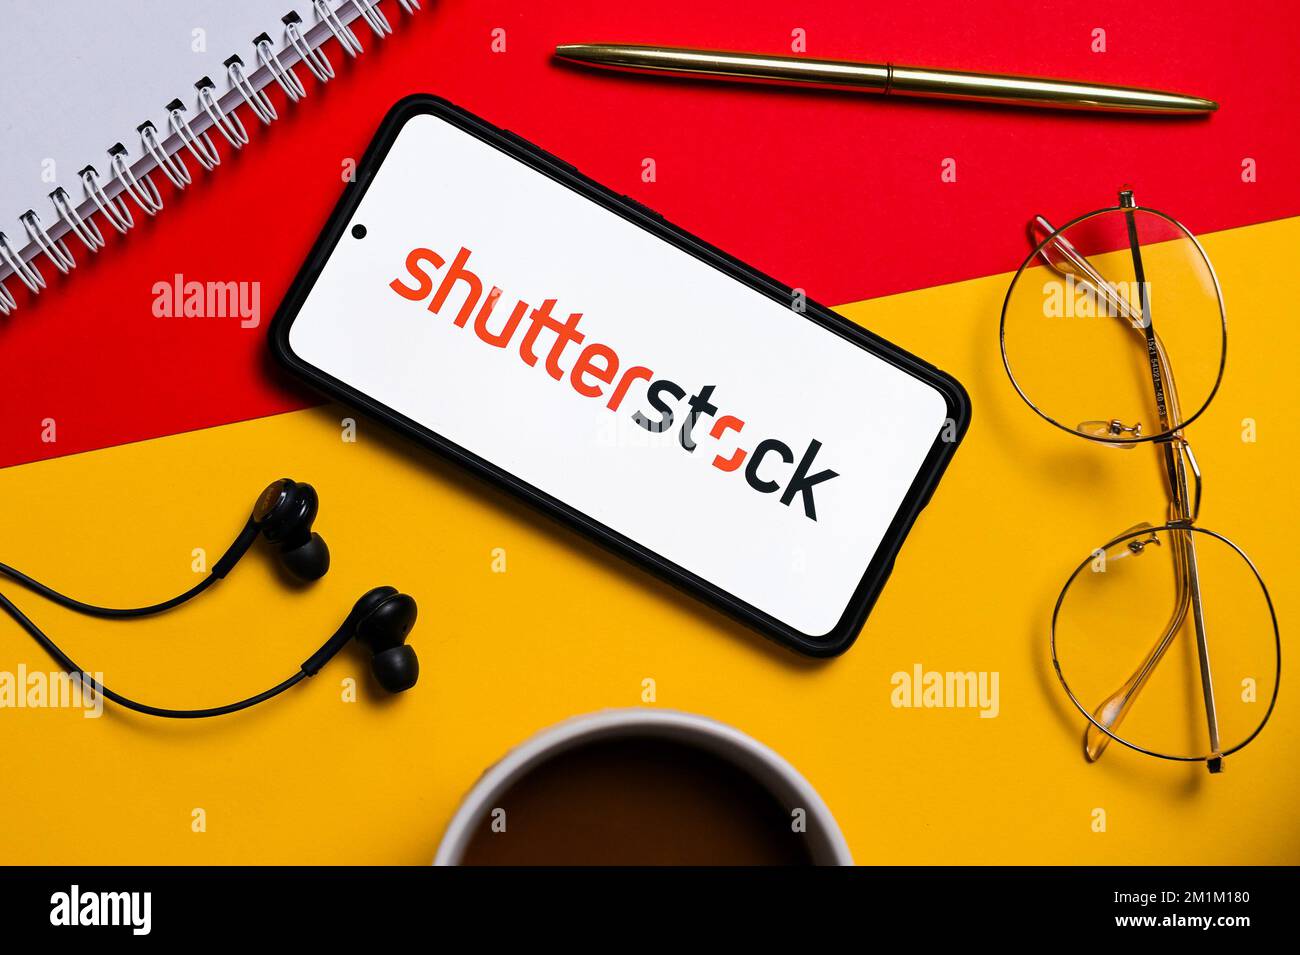 Shutterstock Images Hi-Res Stock Photography And Images - Alamy